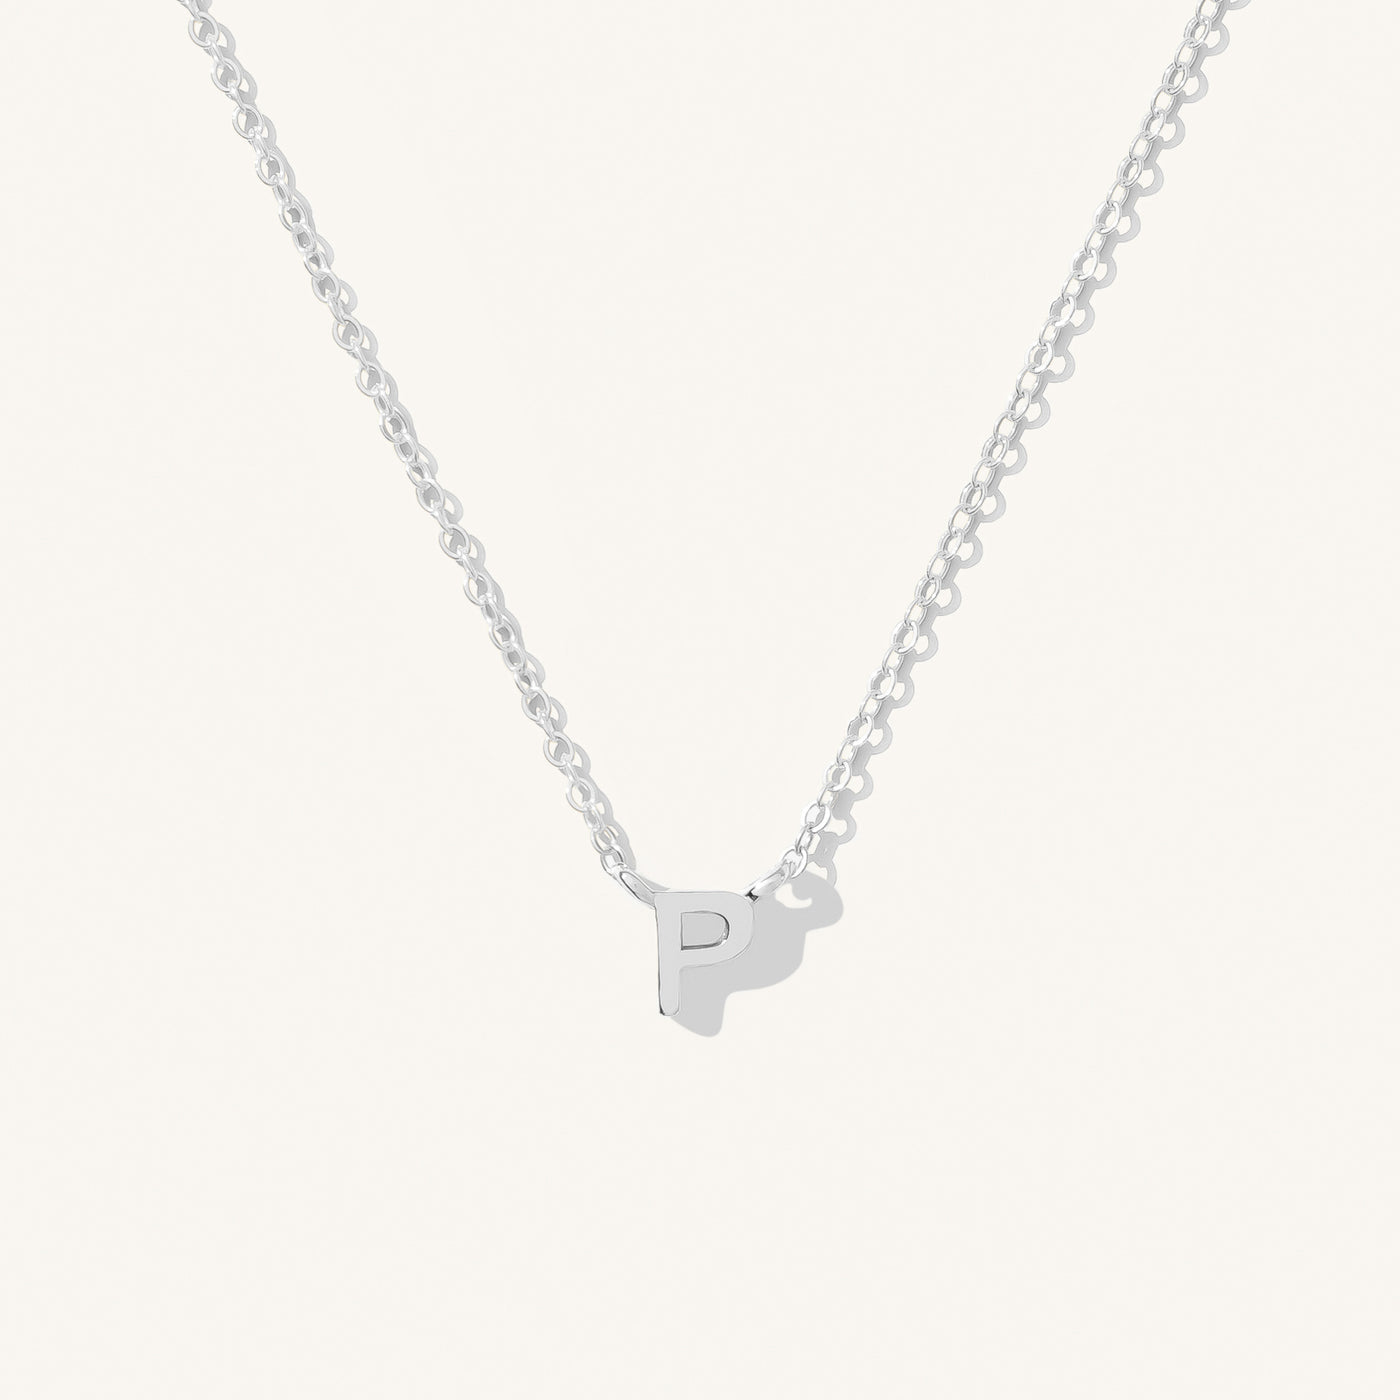 P Tiny Initial Necklace